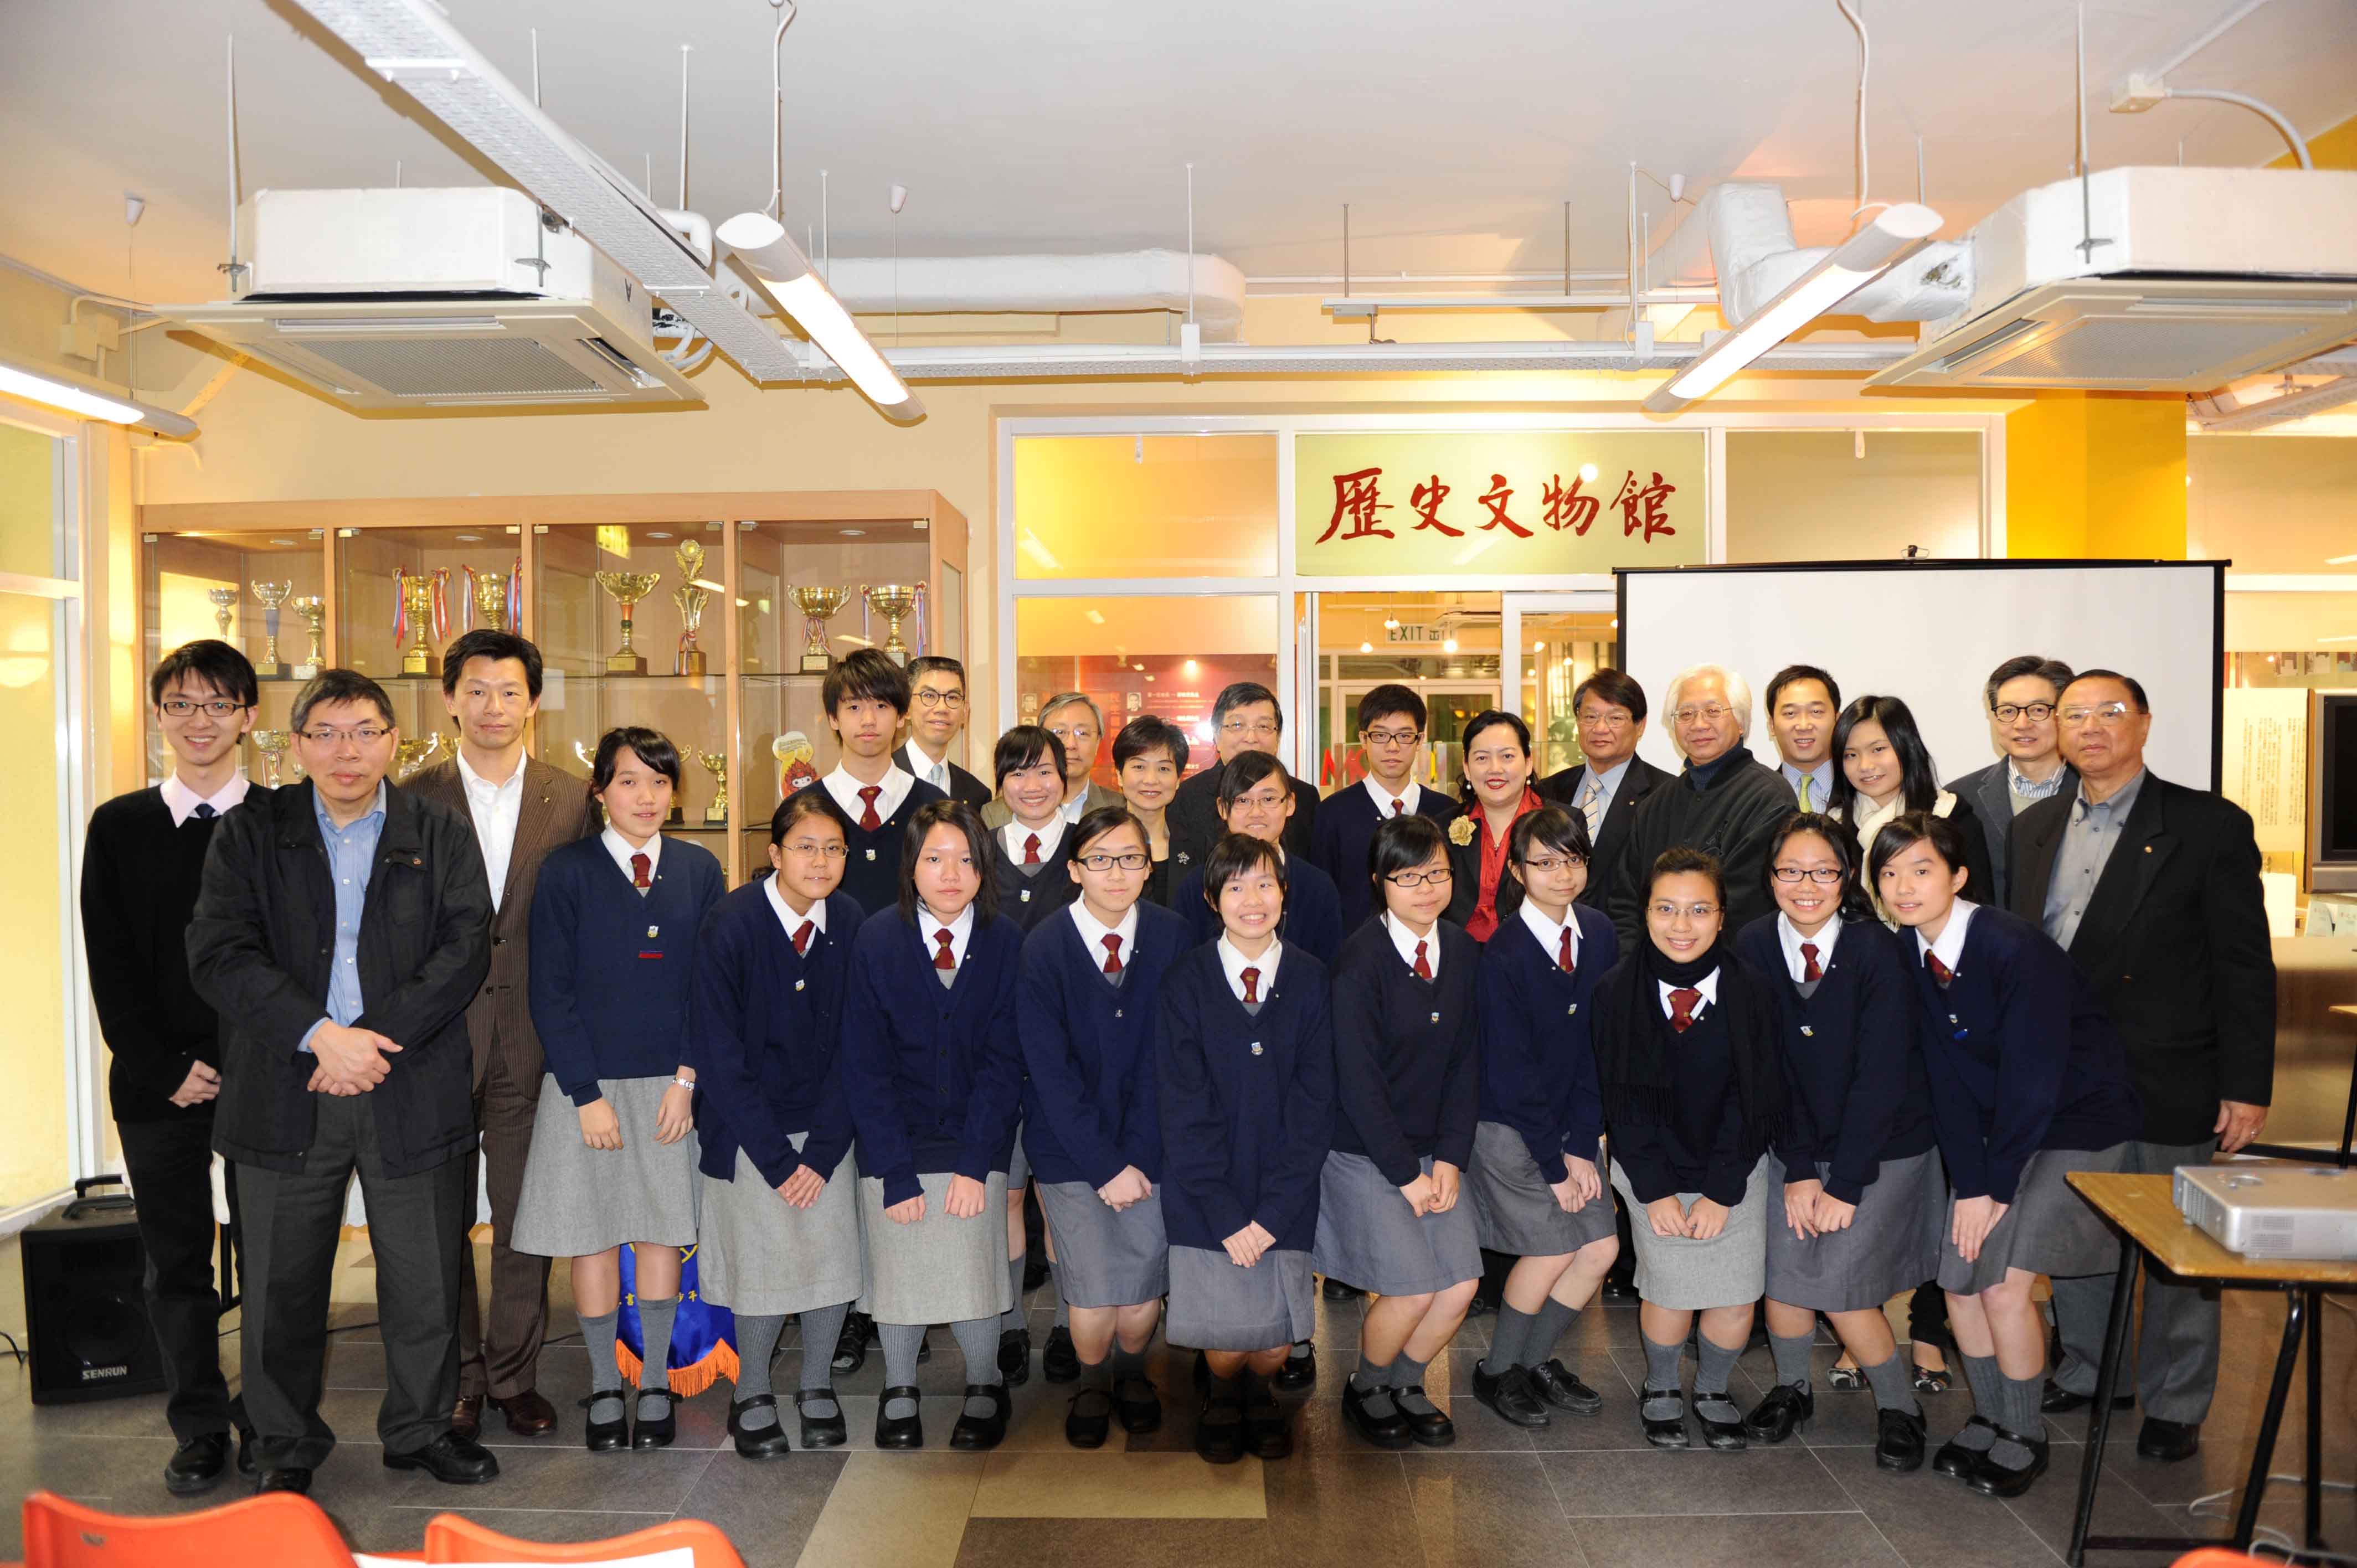 2009 – 2010 The birth of a new Interact Club – Munsang College